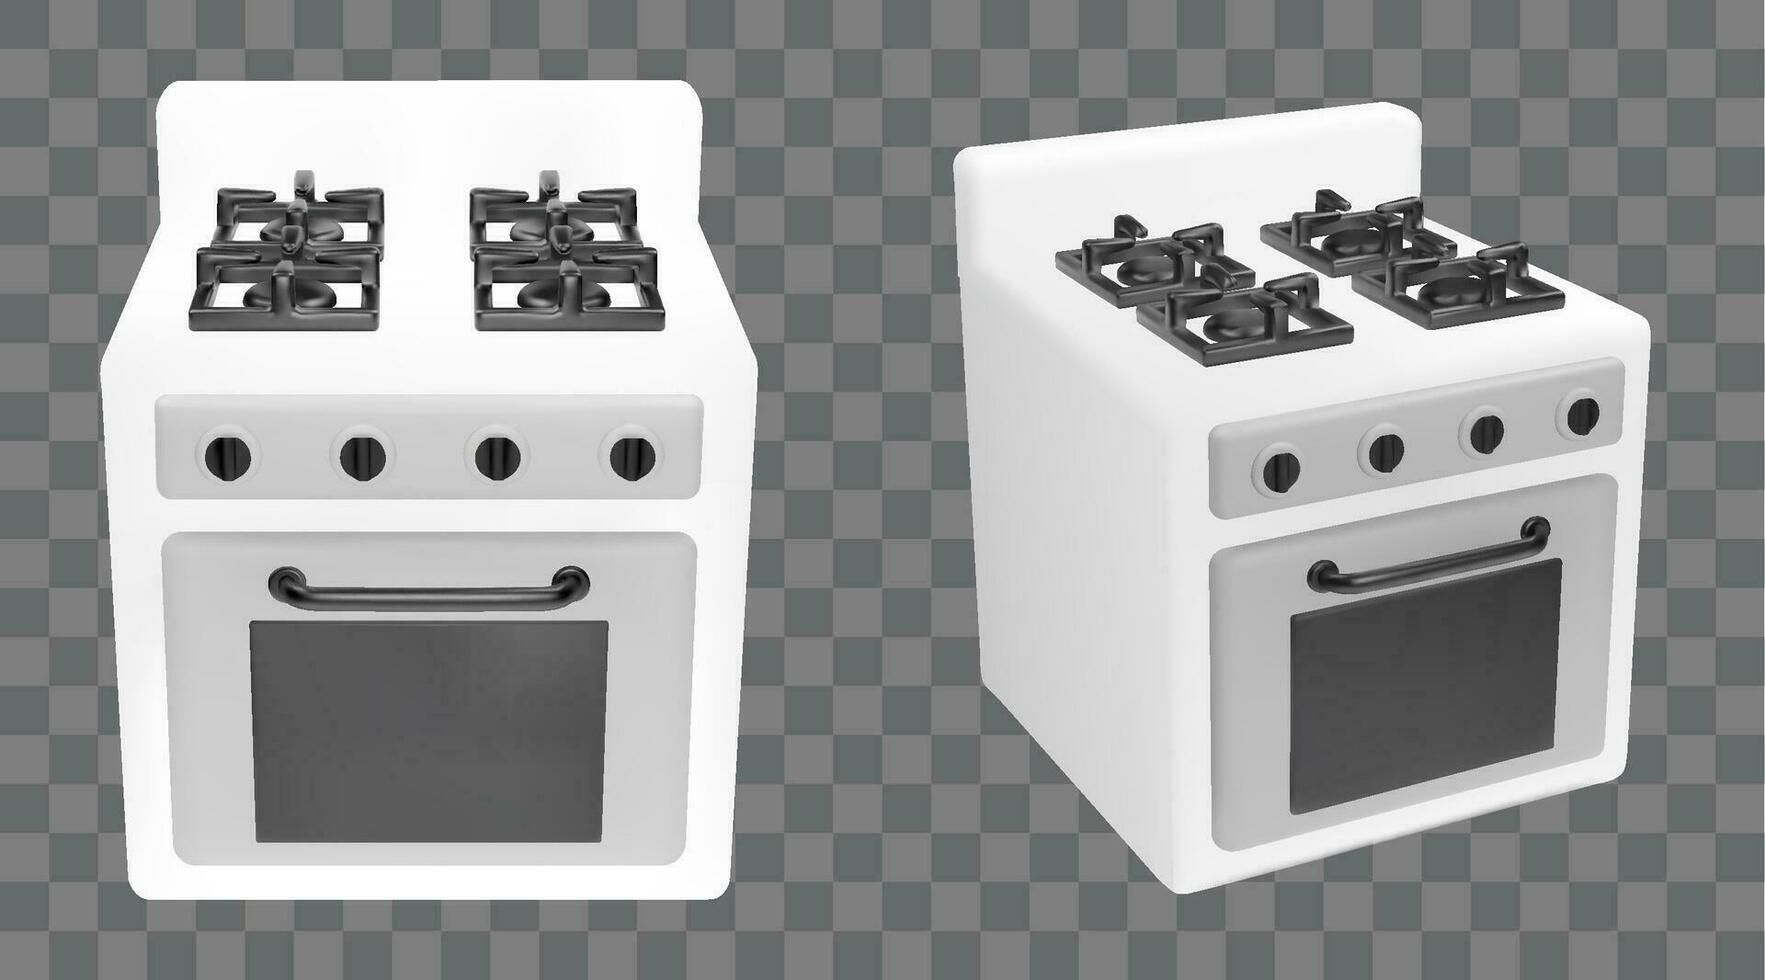 Close 3d gas stove with oven isolated vector interior icon for kitchen. White realistic cooker front display view. Kitchenware design side object with handle household element collection.